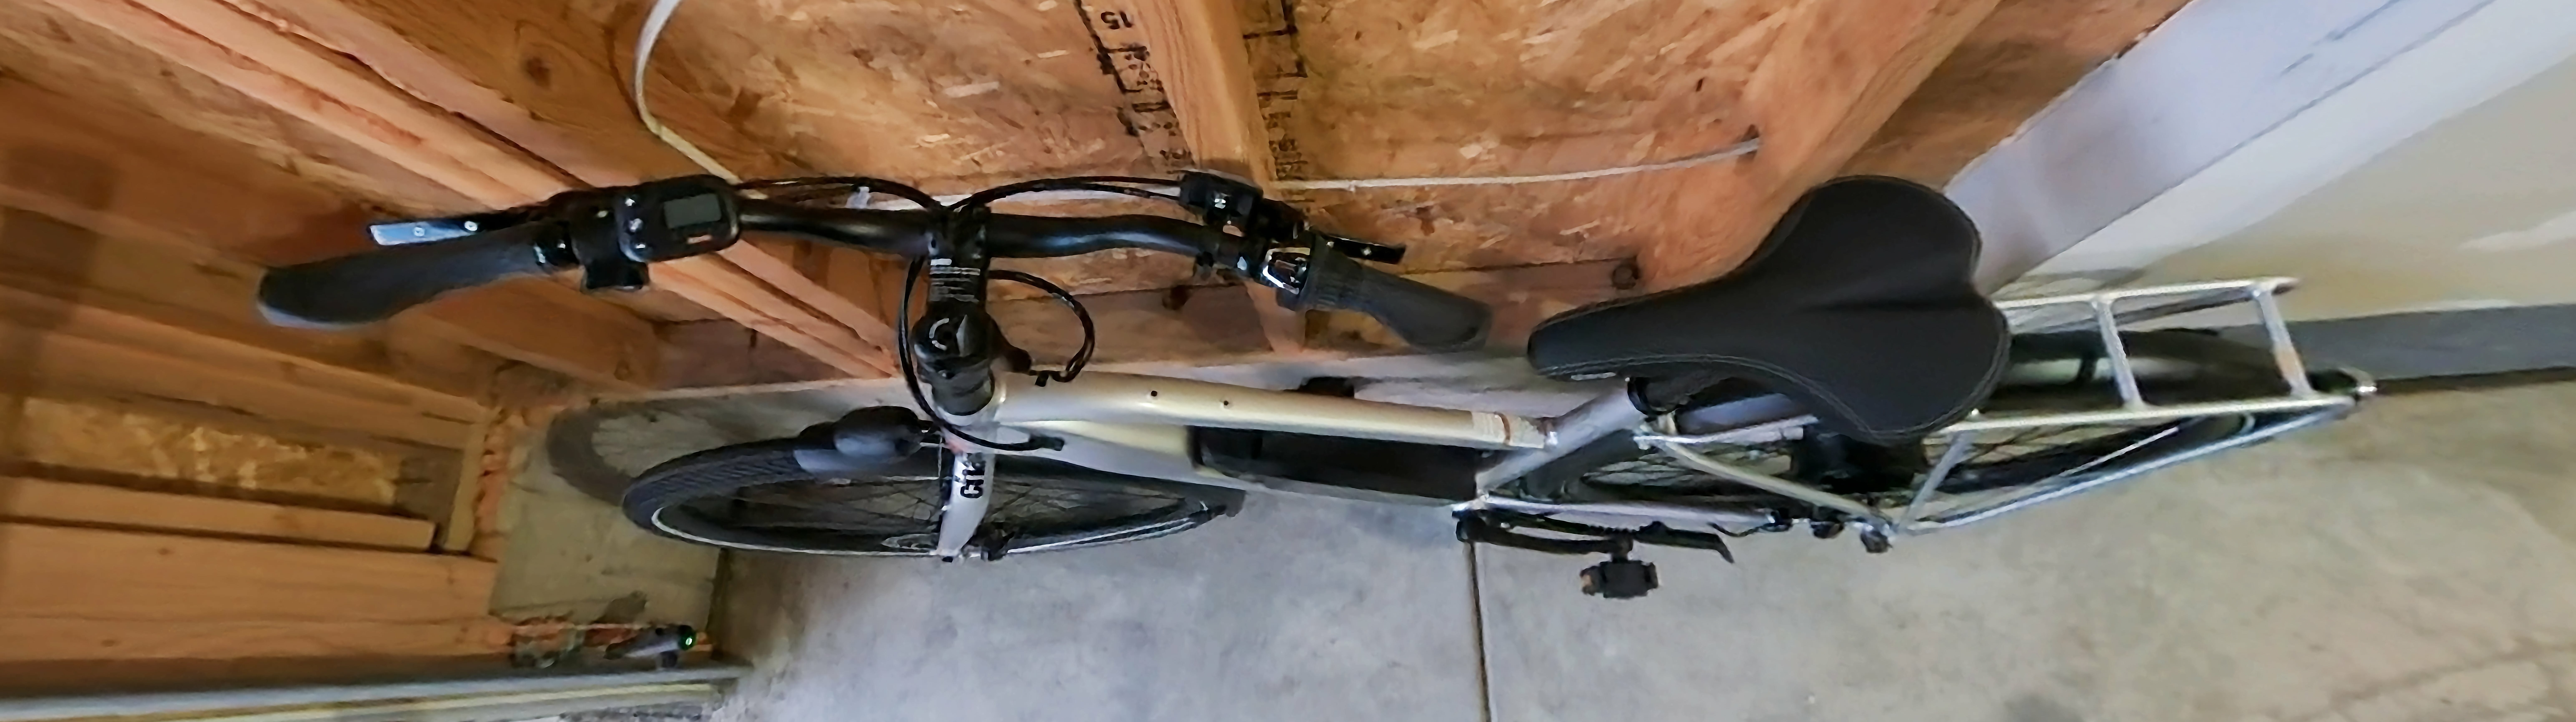 Charge City Review: The Smartest Bike on the Block 14